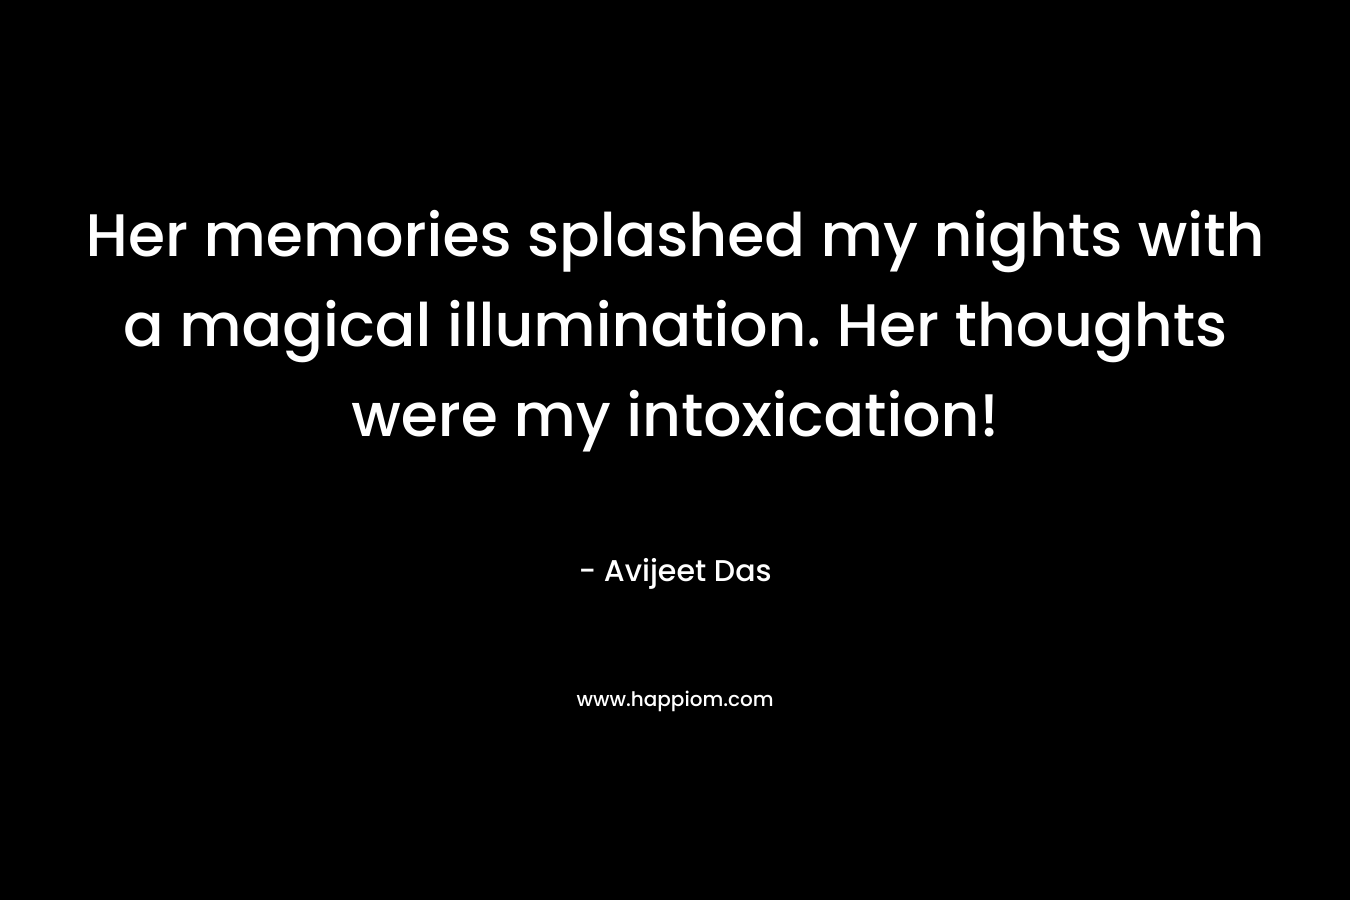 Her memories splashed my nights with a magical illumination. Her thoughts were my intoxication!